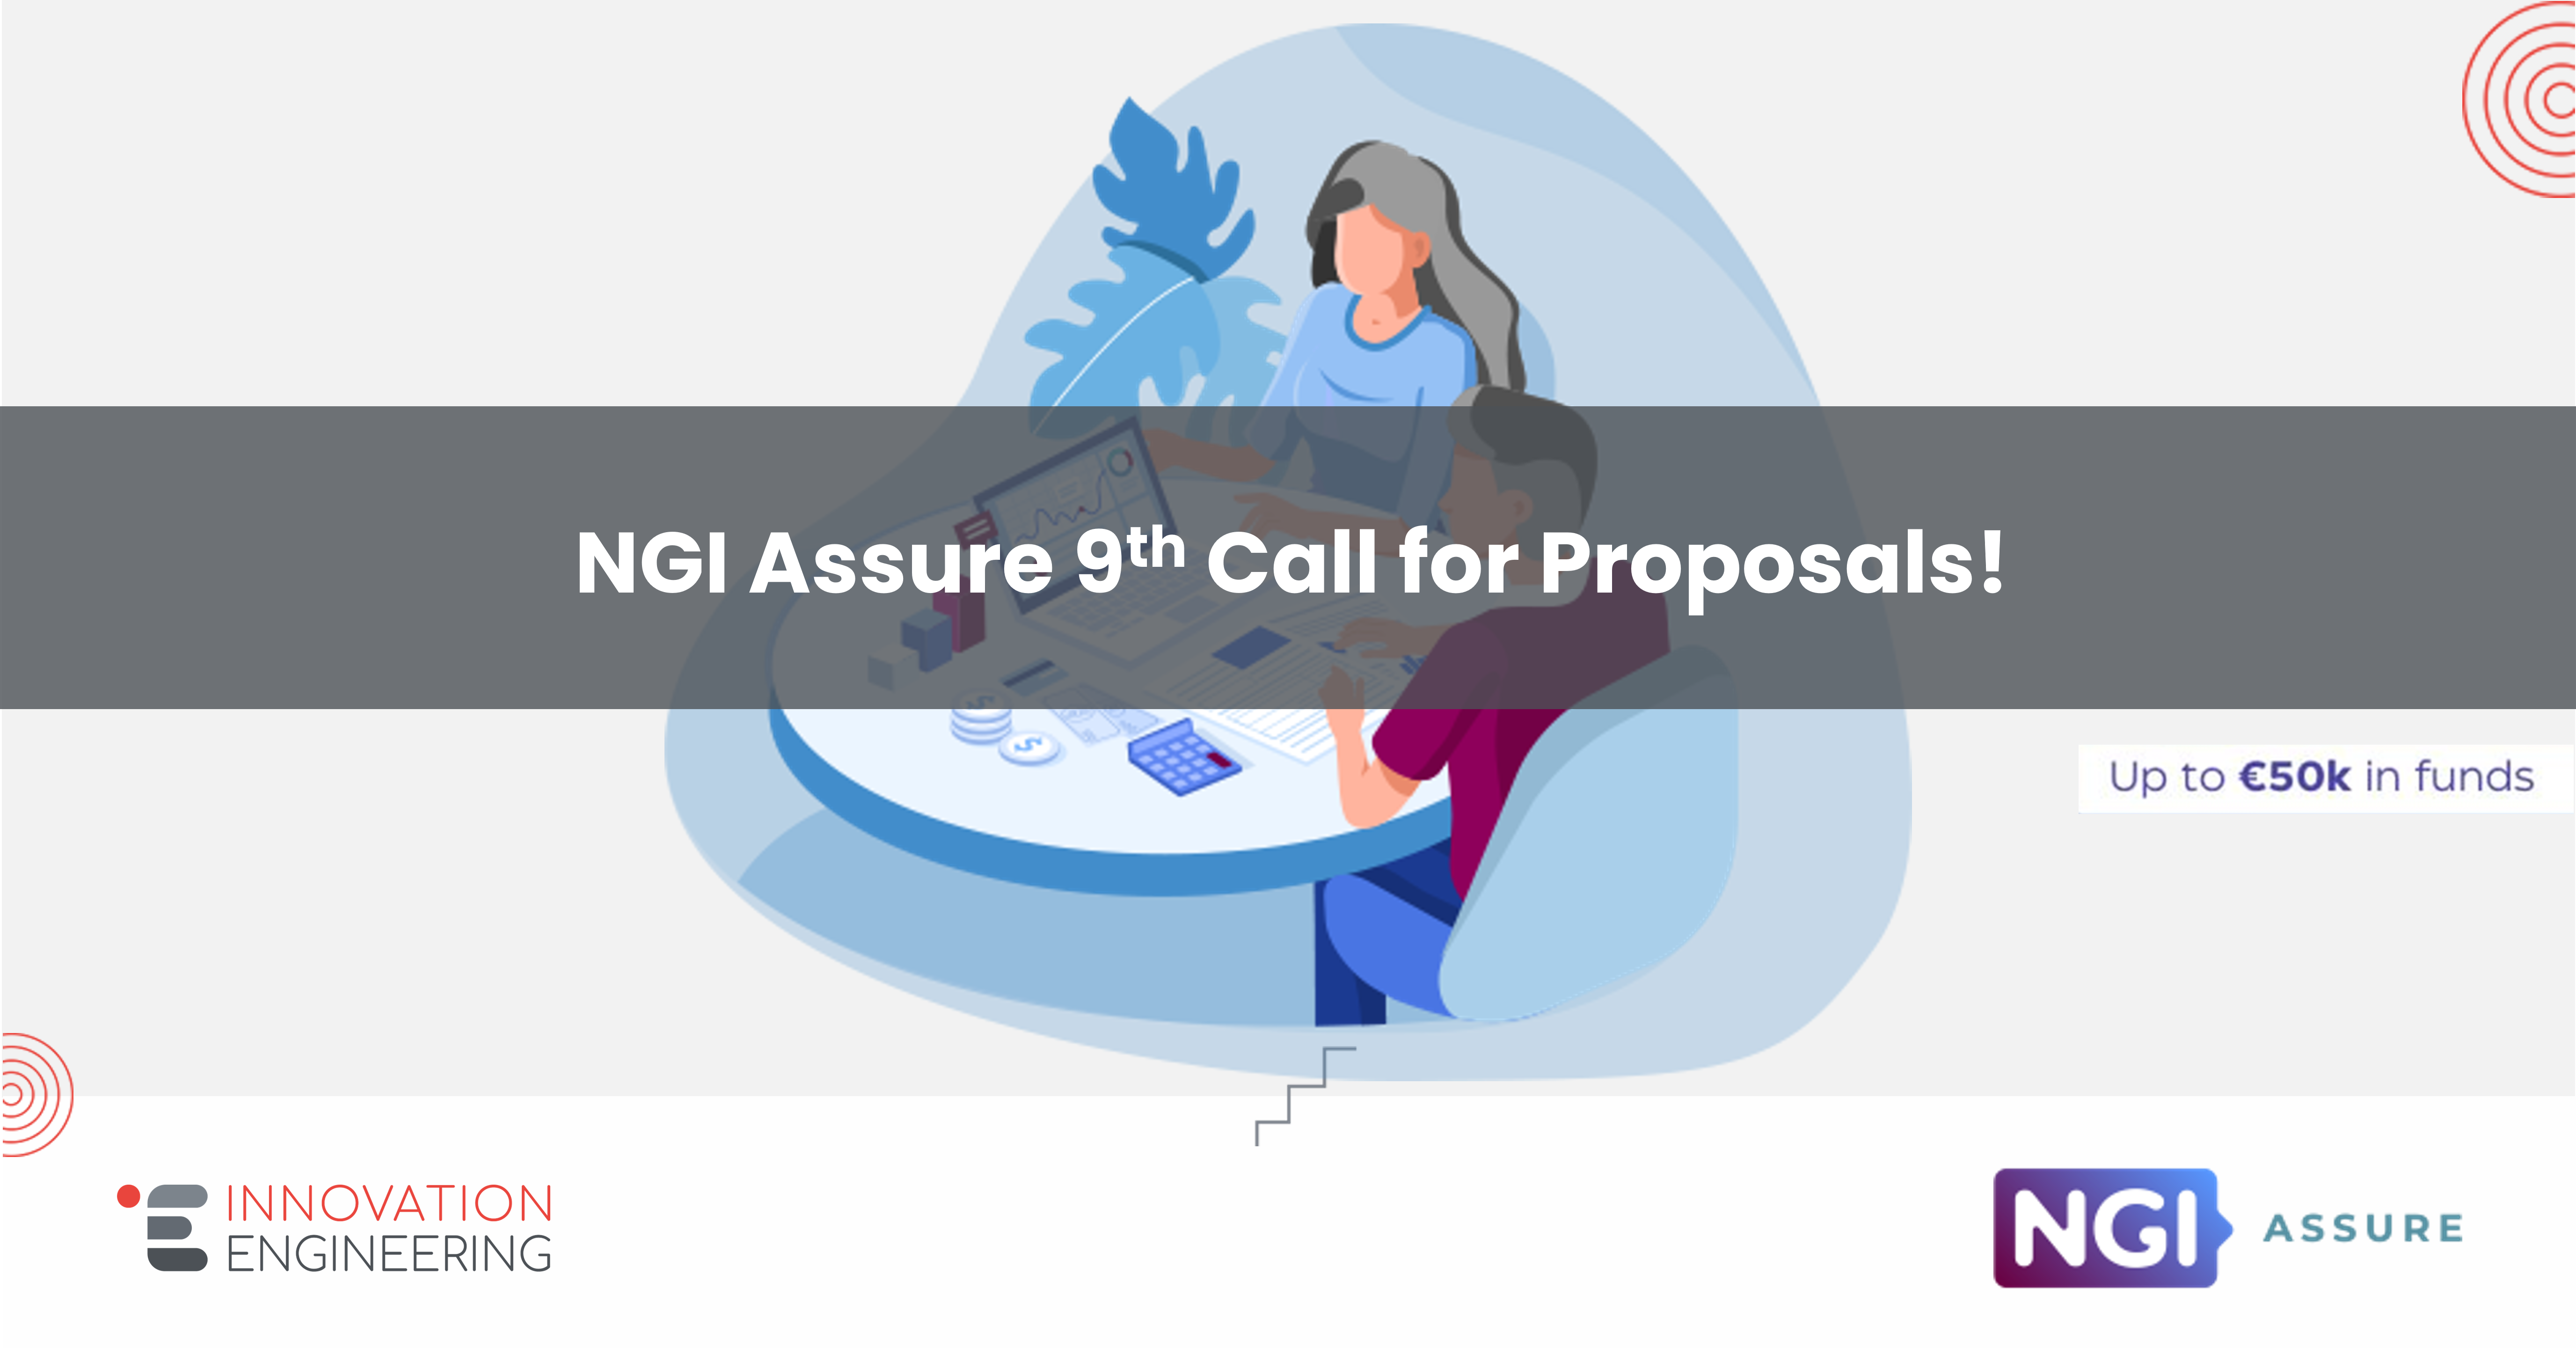 NGI Assure 9th Call for Proposals